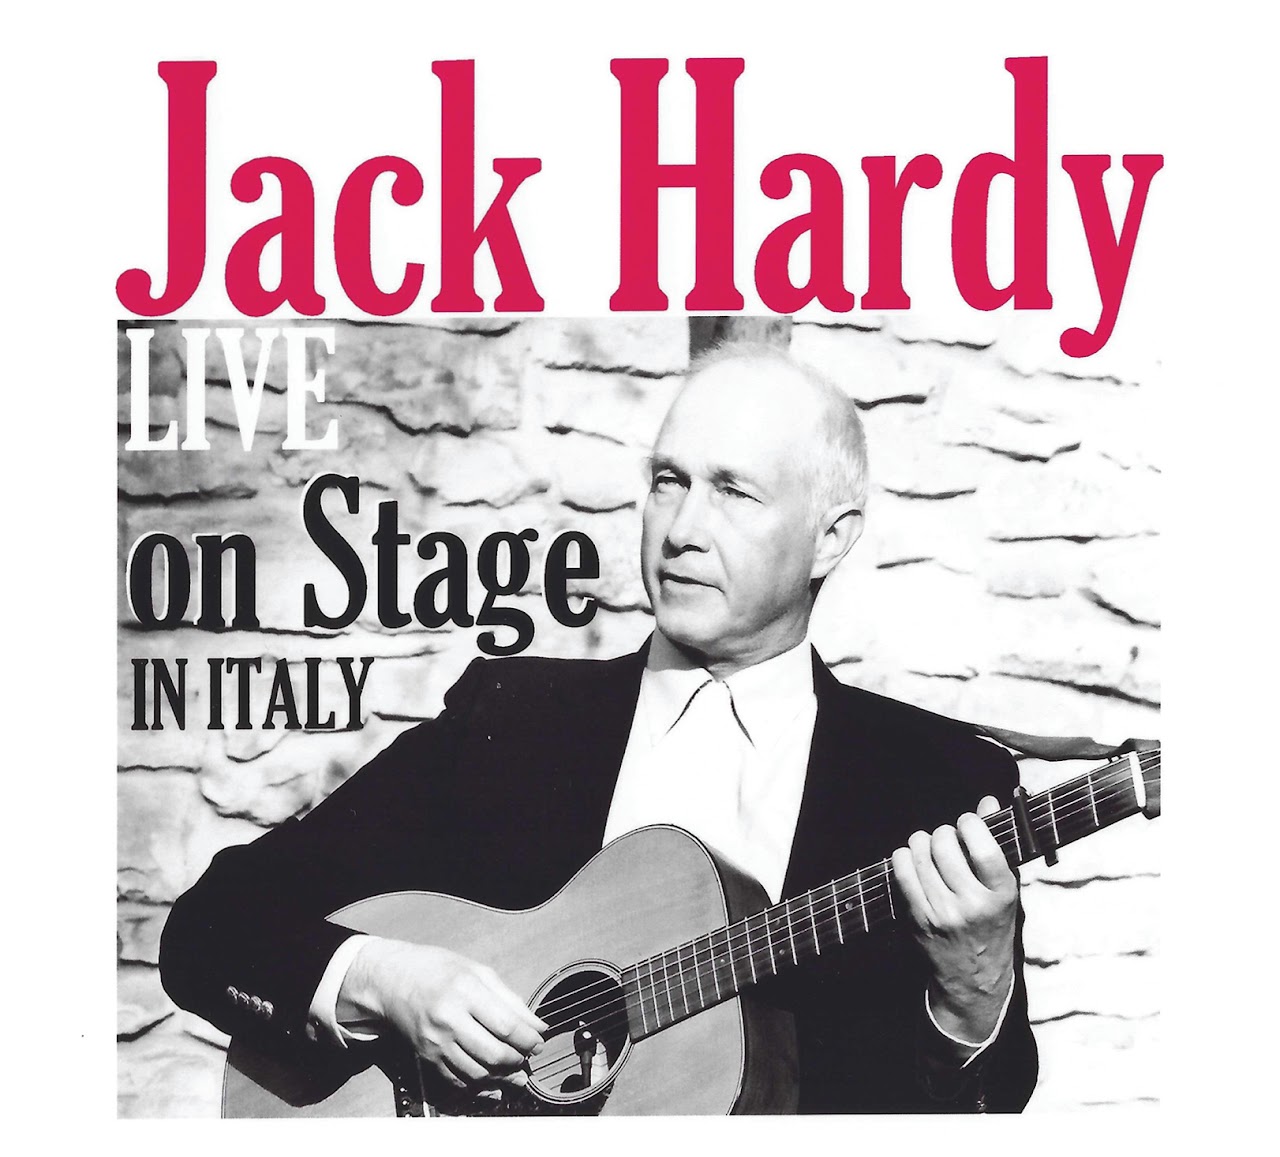 [Live on Stage in Italy - front cover